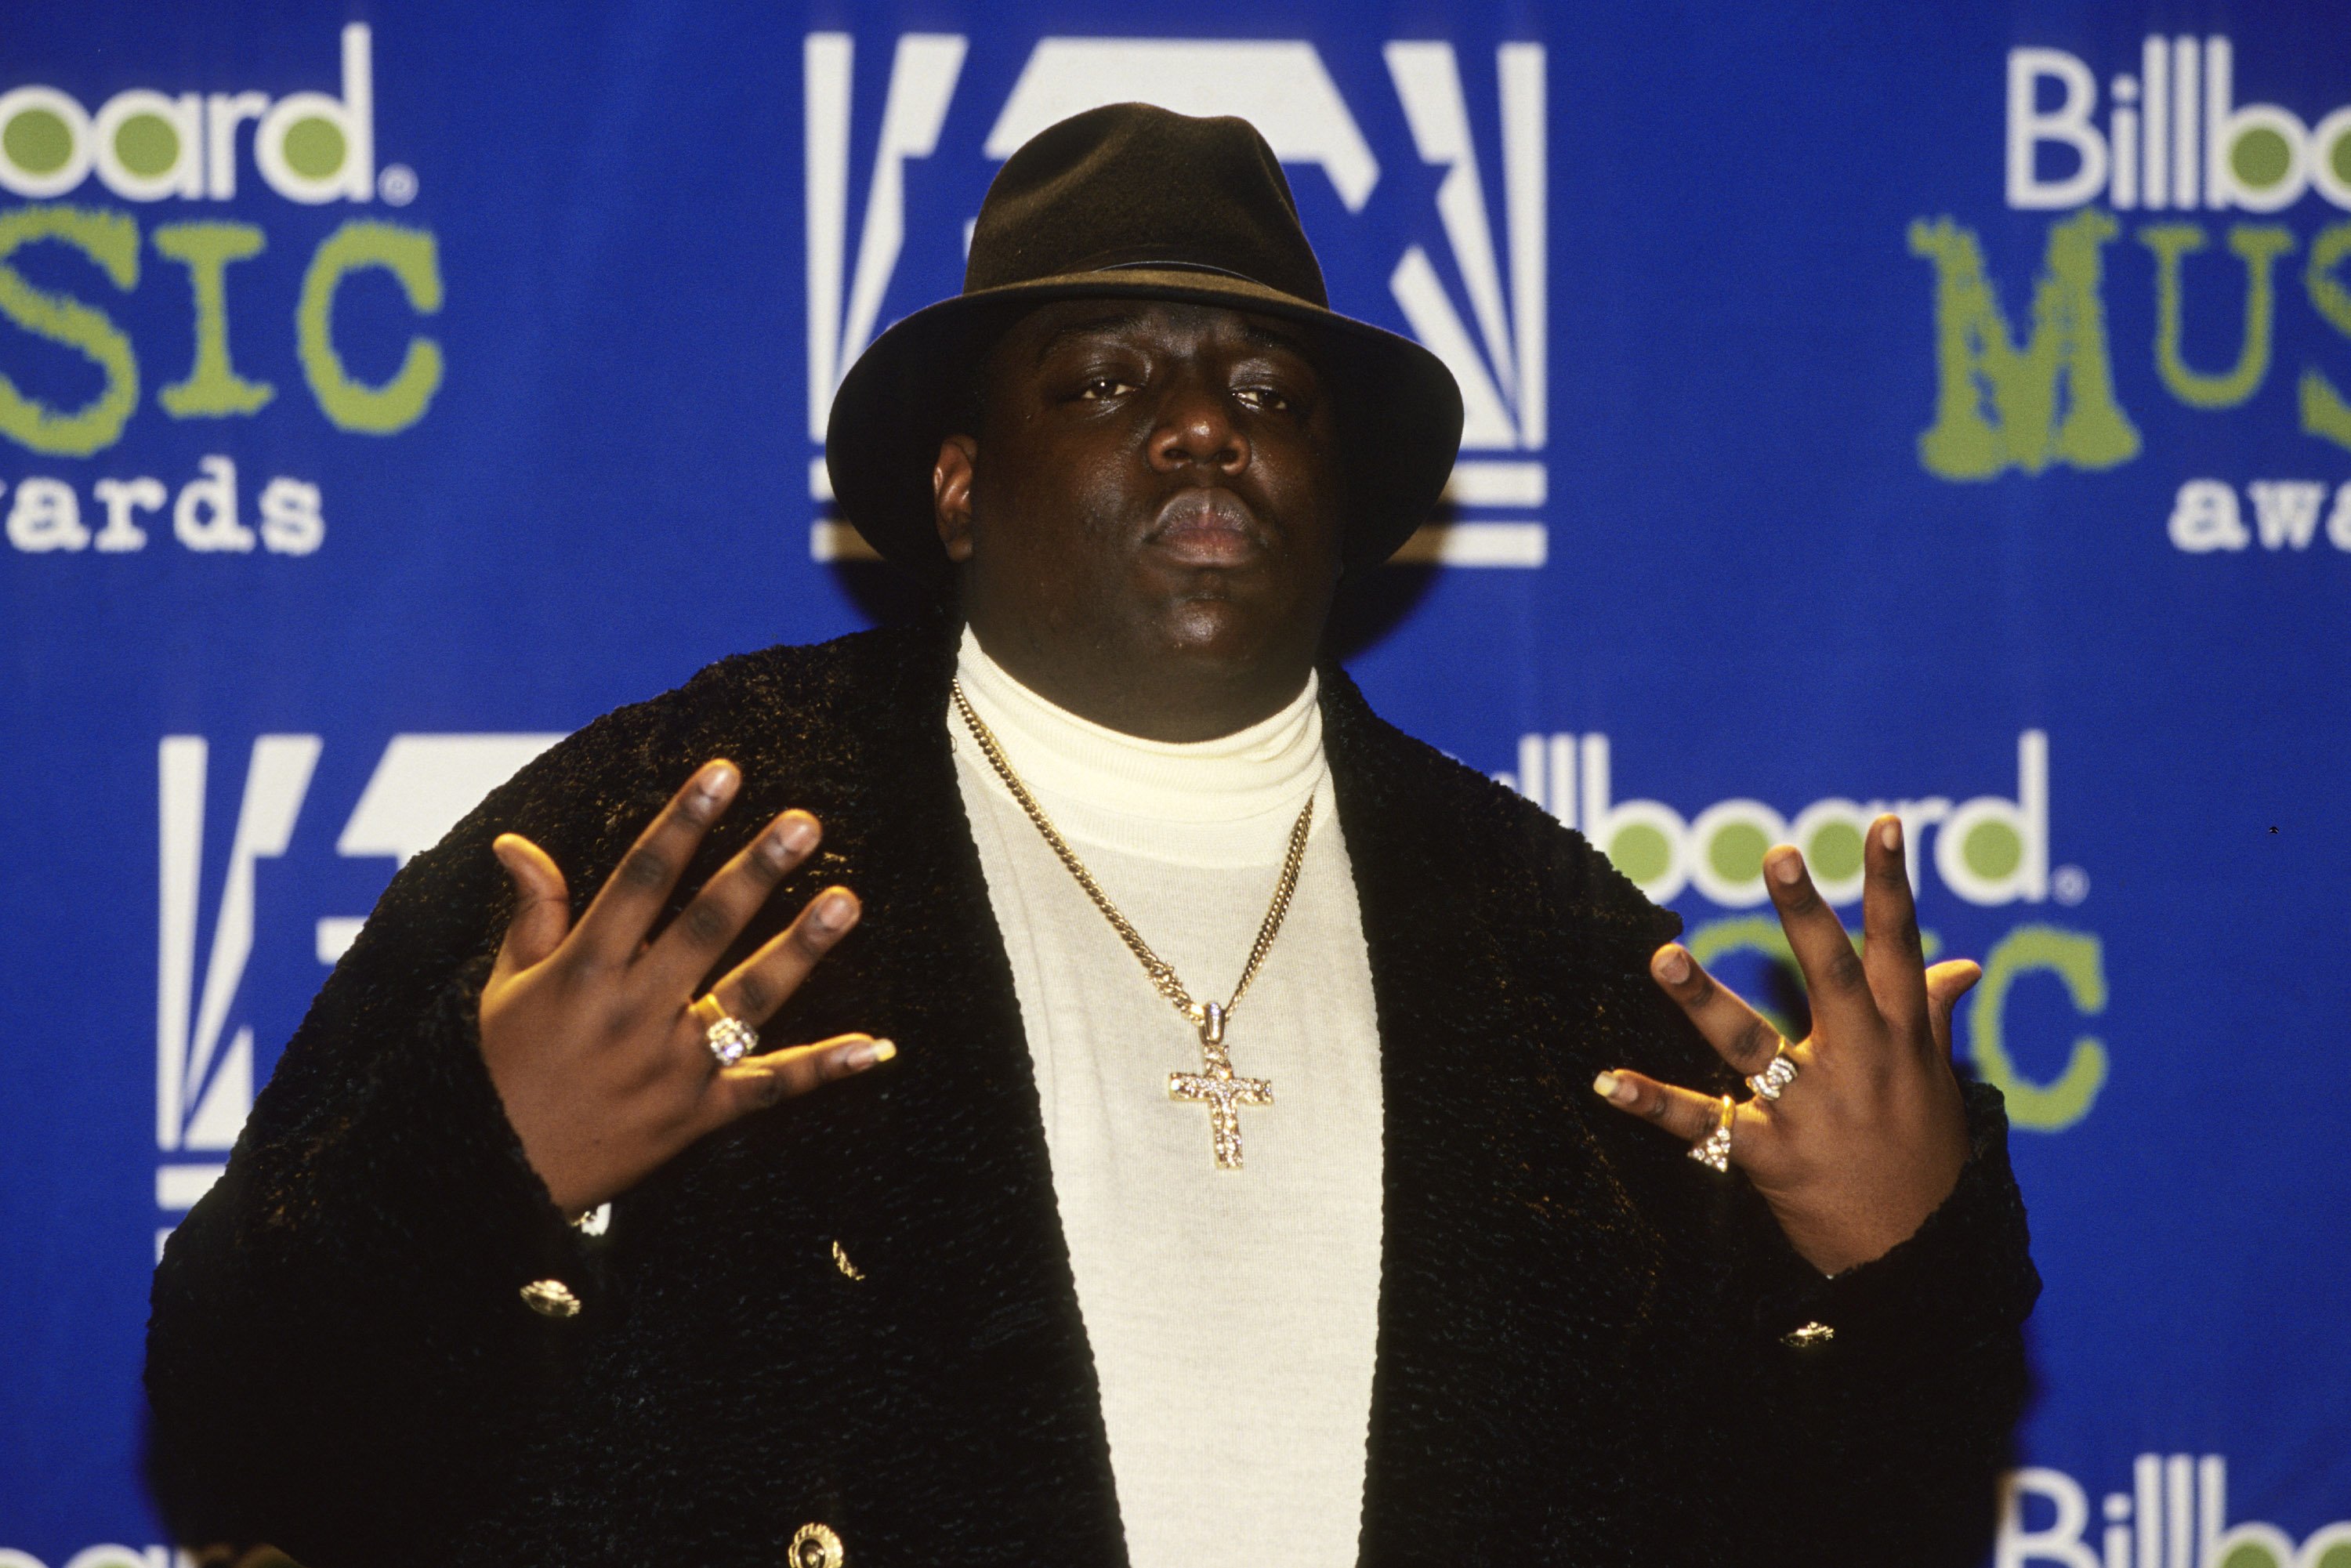 Christopher "Notorious B.I.G." Wallace at the 1995 Billboard Music Awards, New York, New York, December 6, 1996. | Source: Getty Images